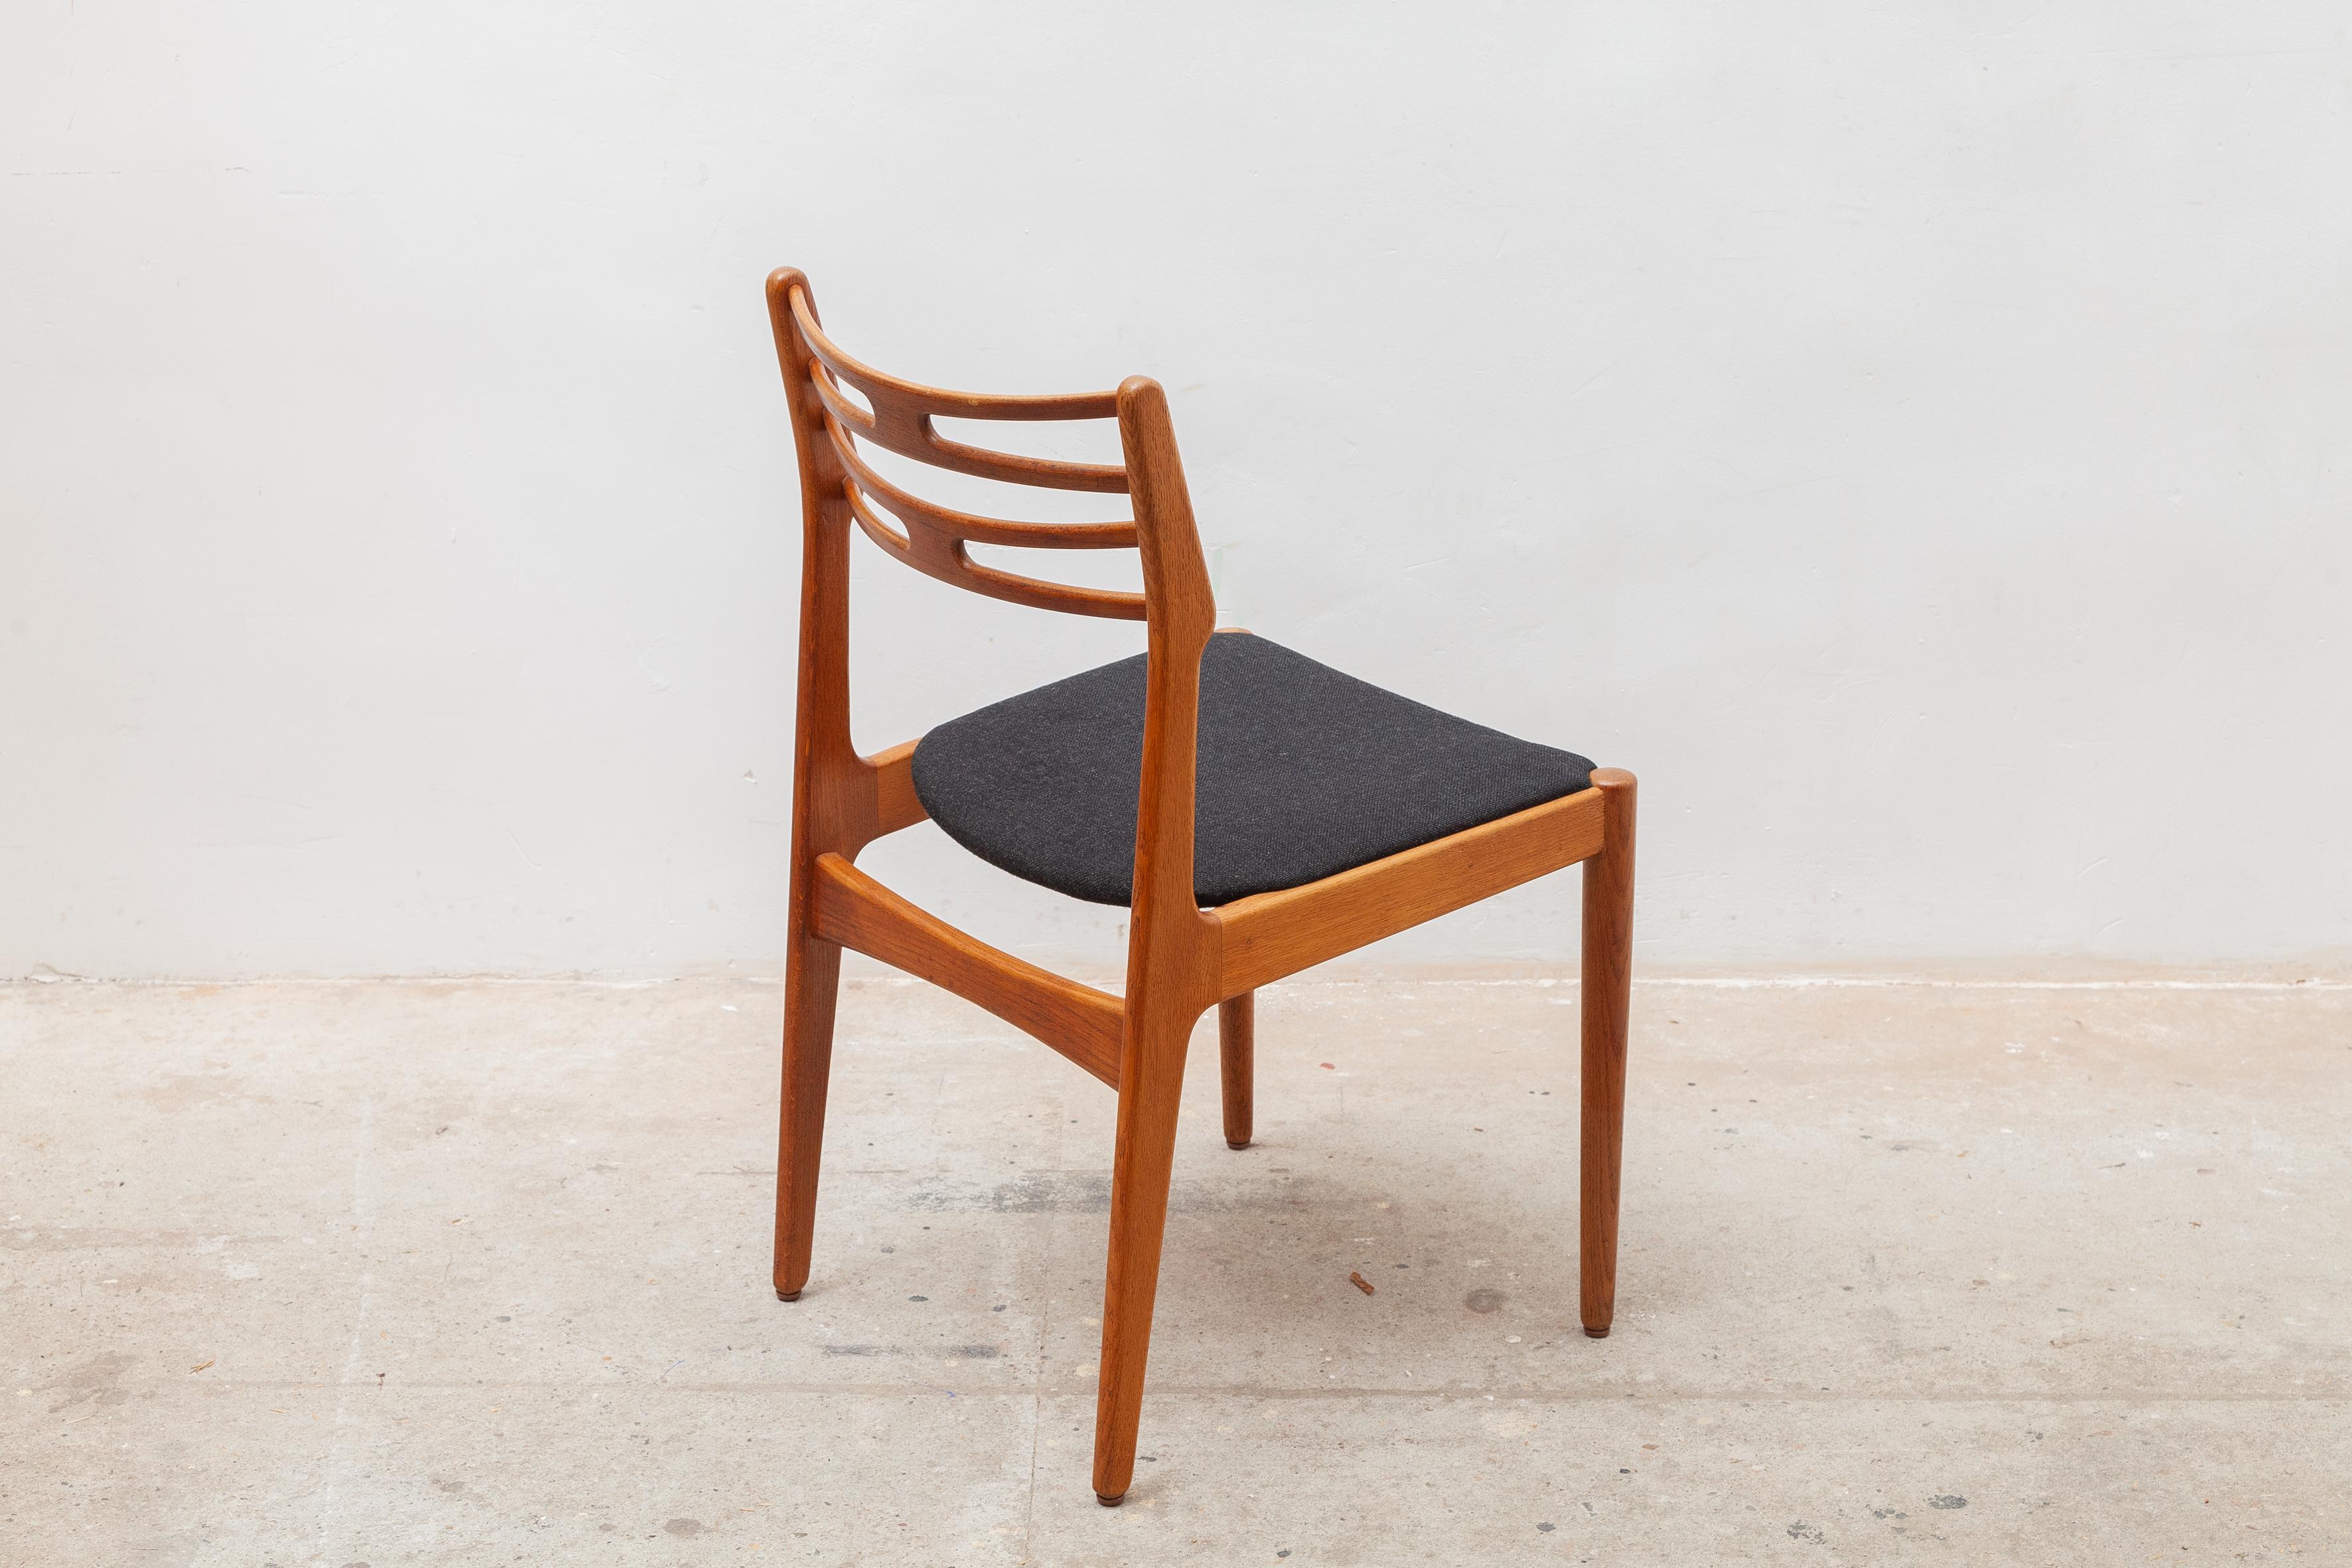 Hand-Crafted Denmark Dining Chairs Designed by J.Andersen